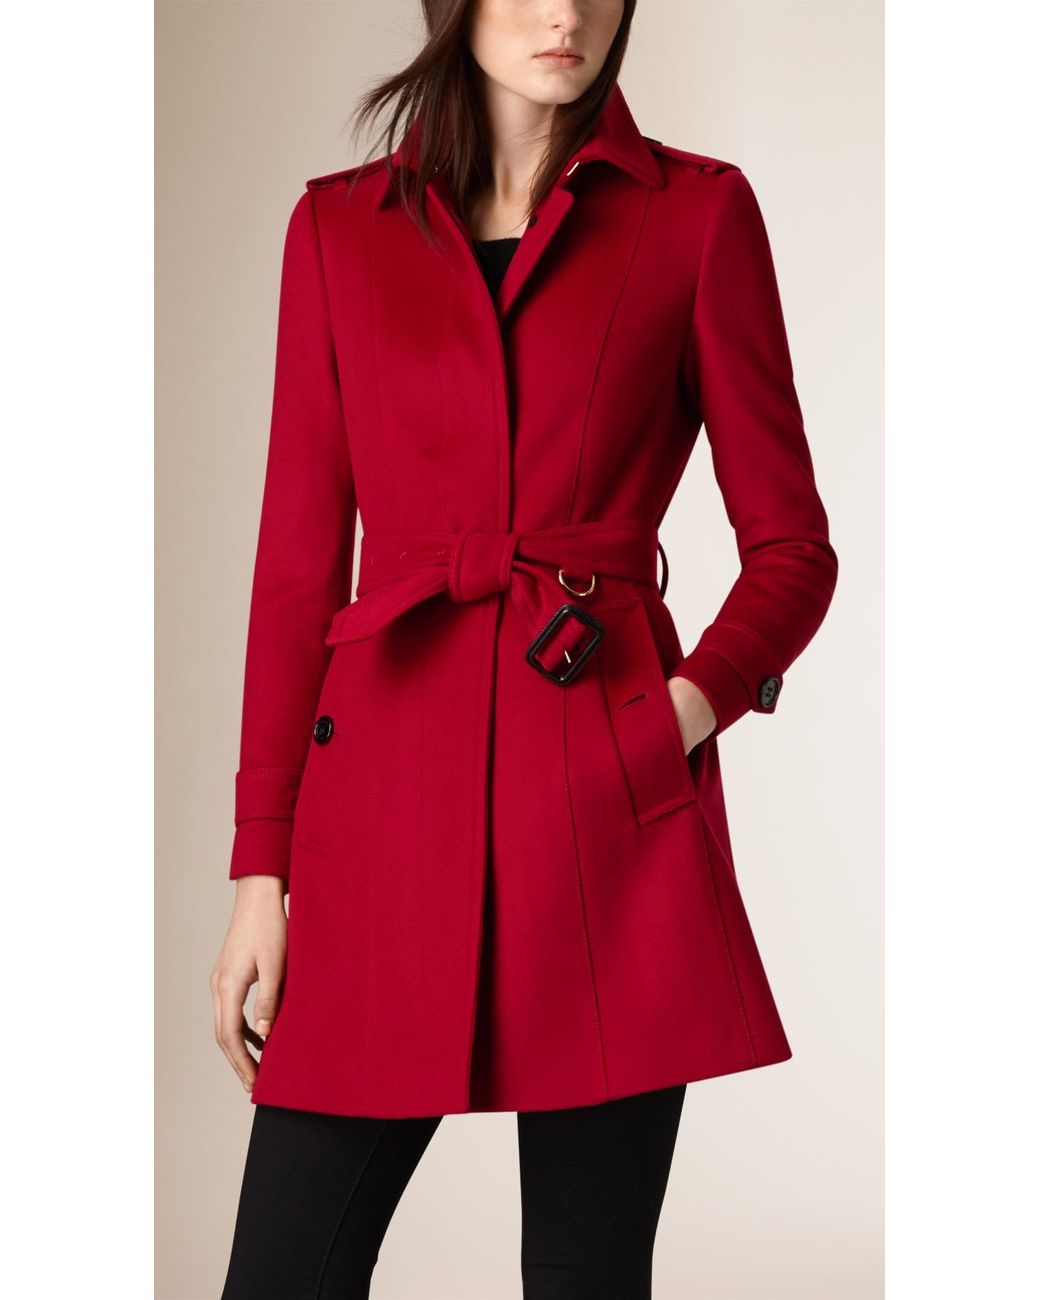 Burberry Pleat Detail Wool Cashmere Trench Coat in Red | Lyst